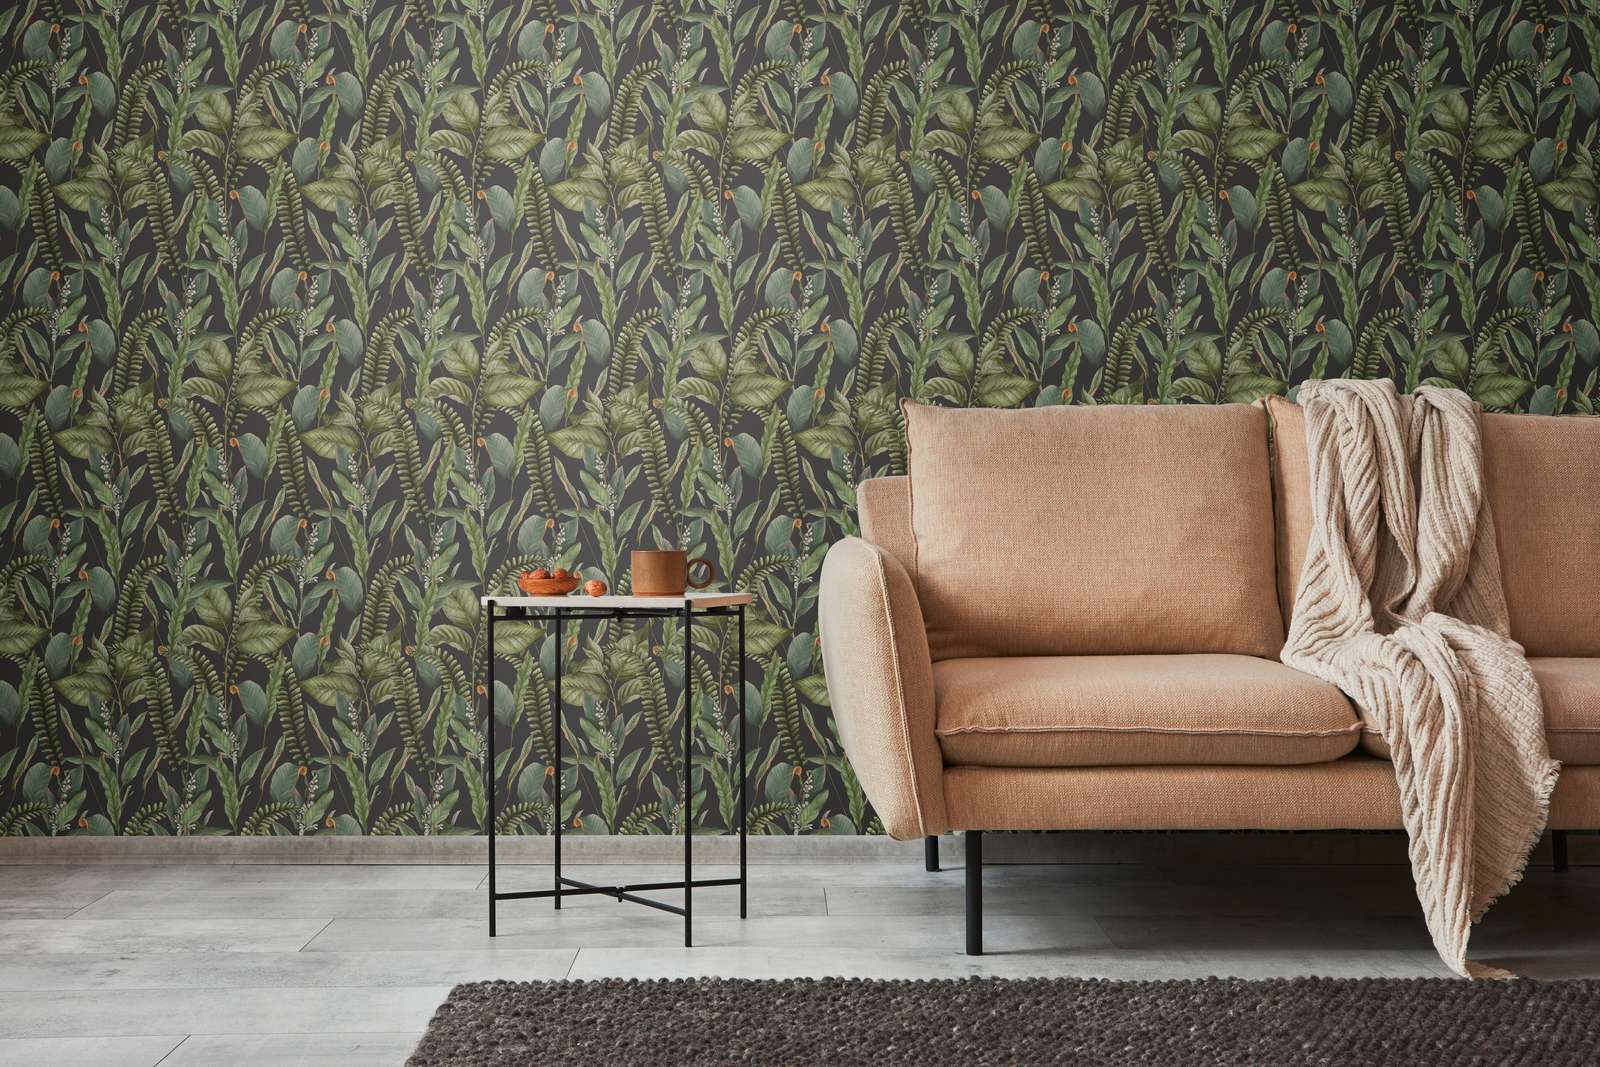             Floral style jungle wallpaper with leaves & flowers textured matt - black, green, orange
        